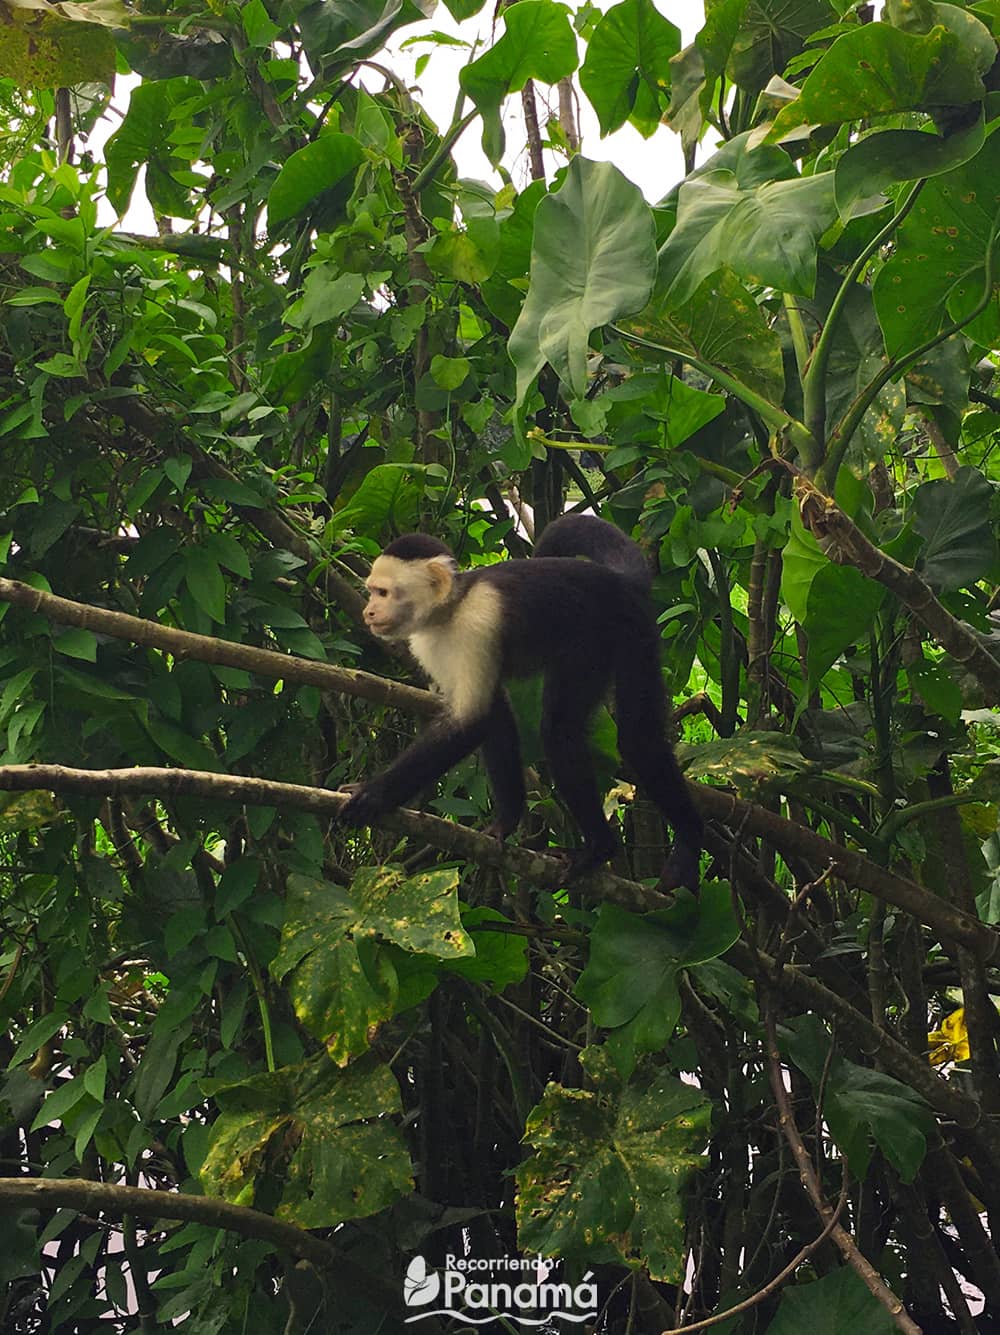 Another White-faced Monkey on another monkeys island